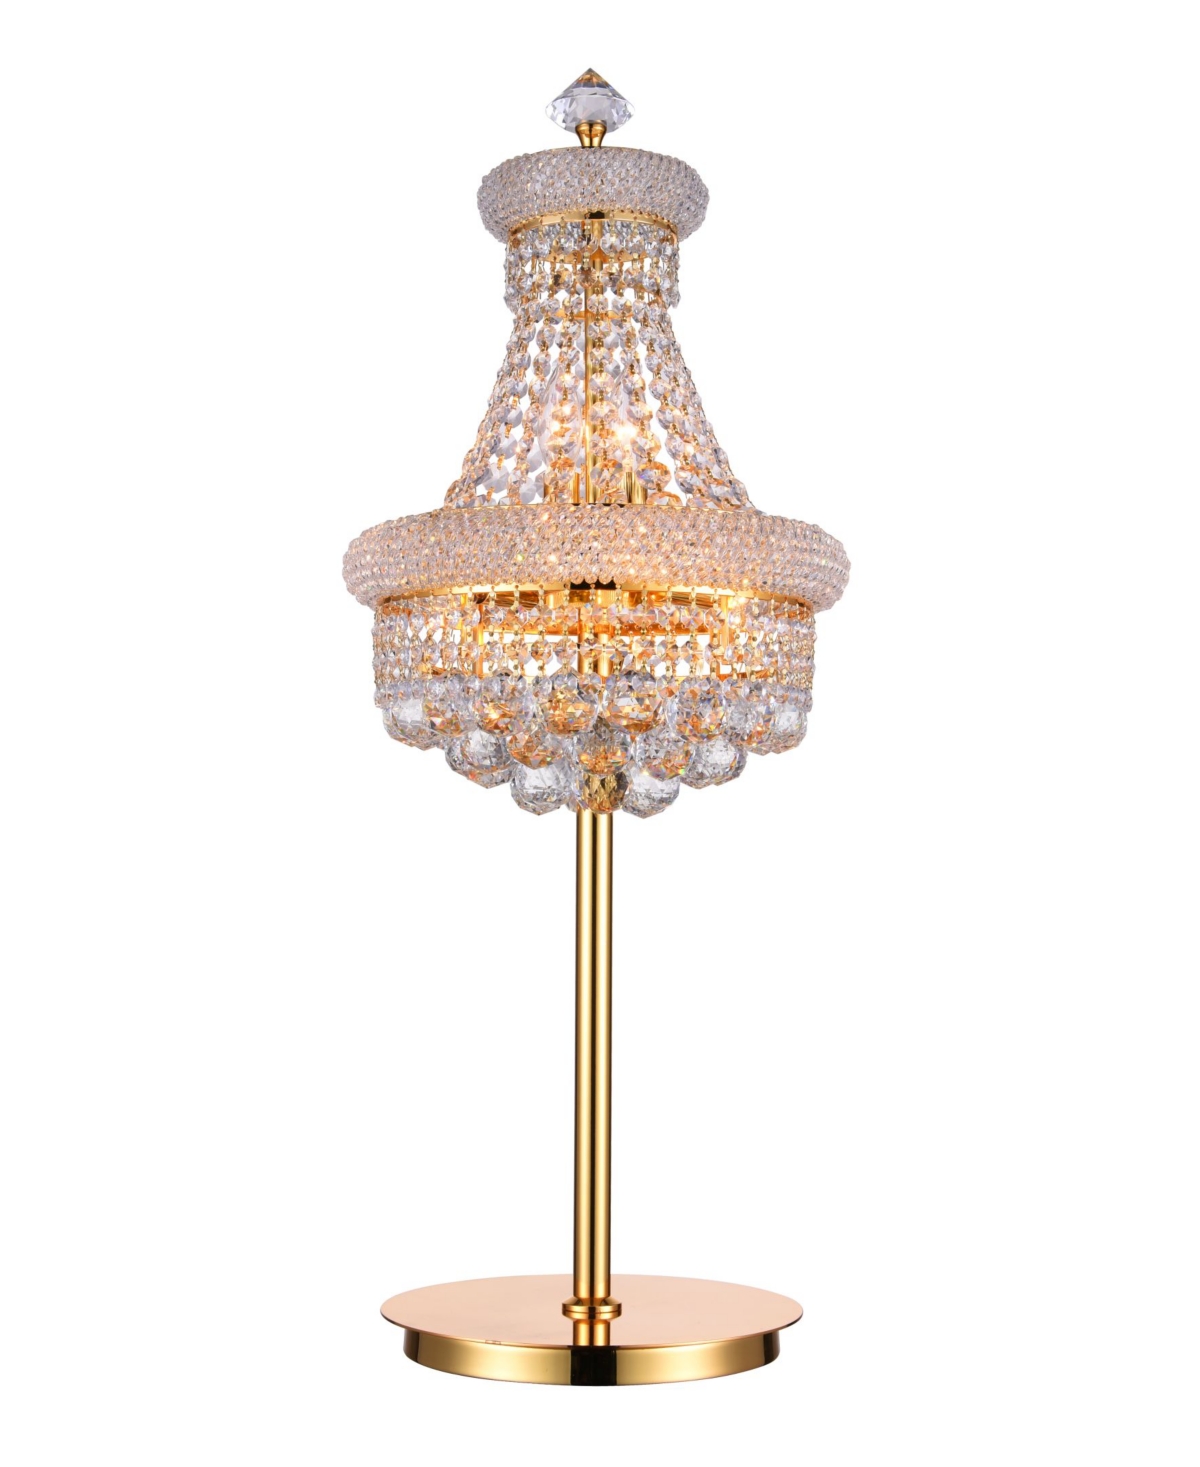 Cwi Lighting Empire 6 Light Table Lamp In Gold